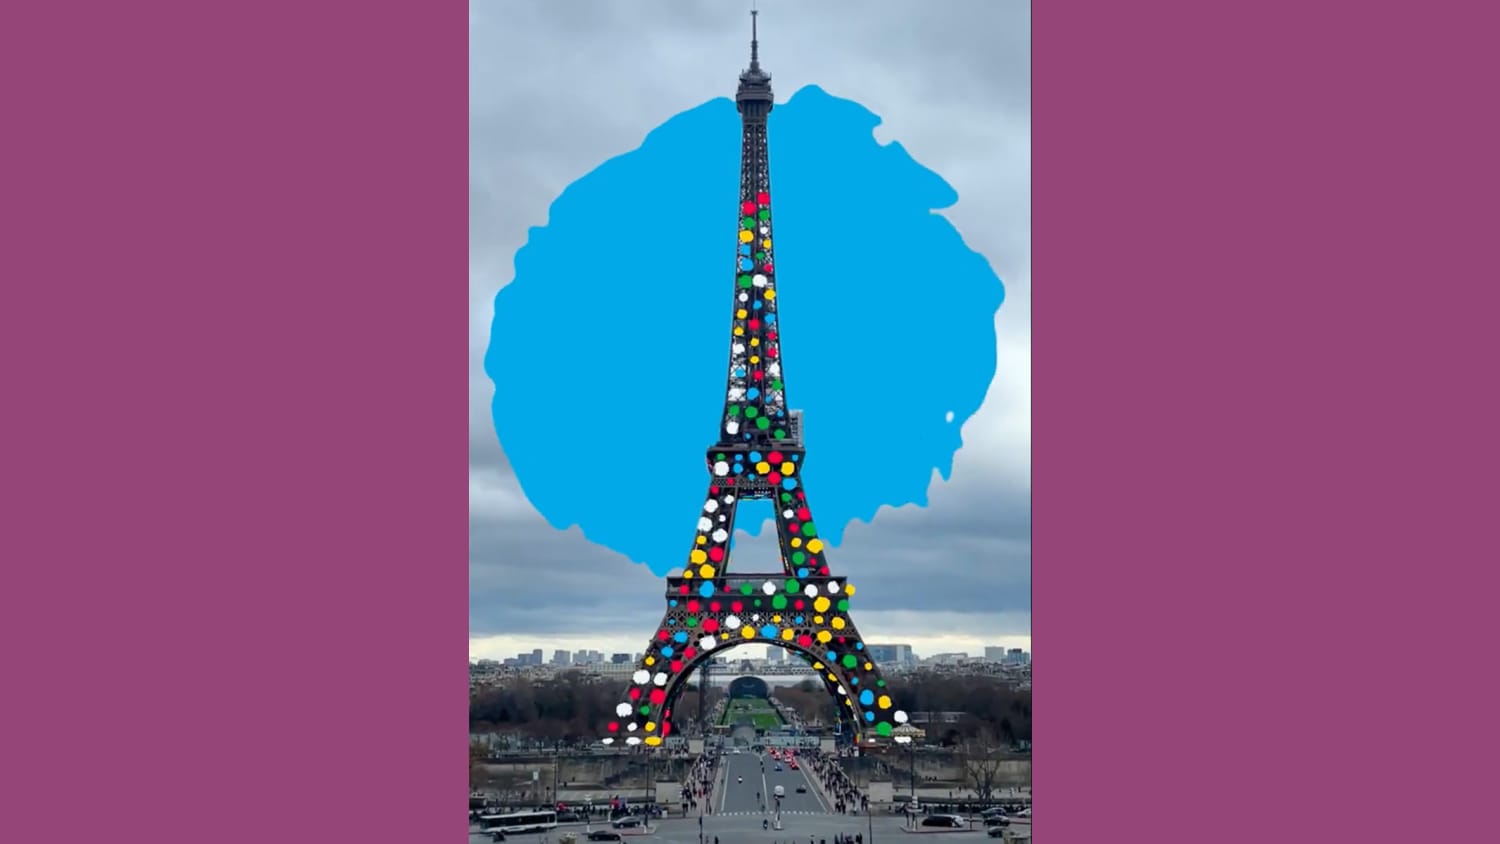 An image of the Eiffel Tower with a blue animated circle behind it and yellow, green, and red dots covering it through a digital filter.